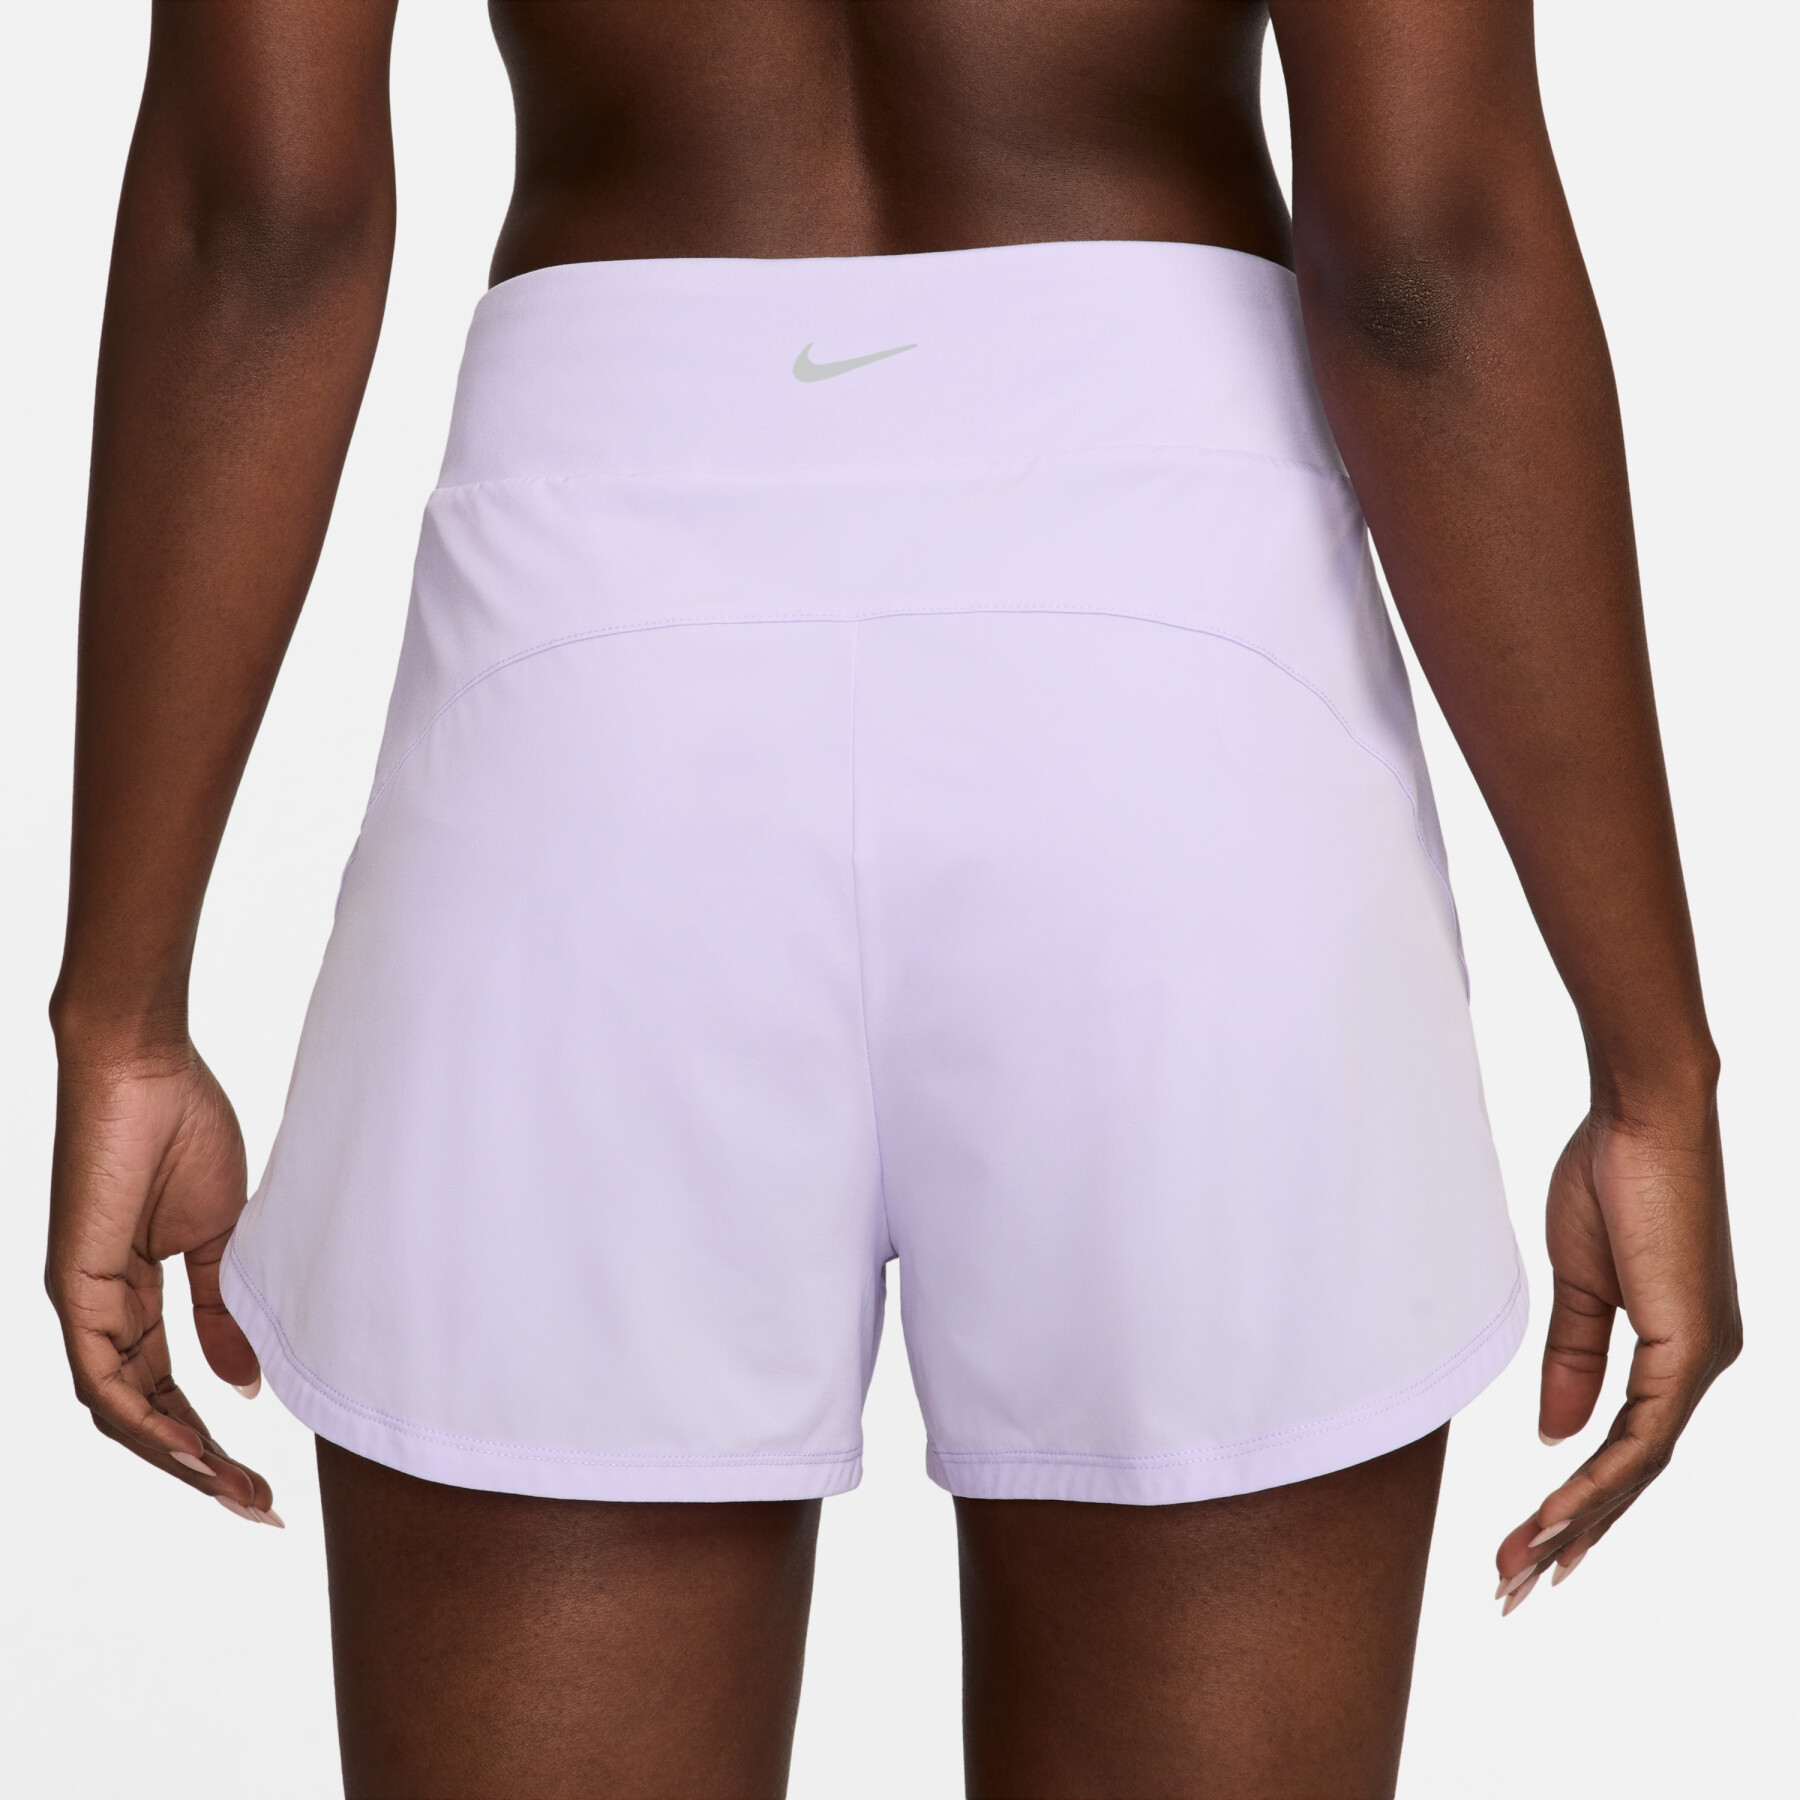 Women's mid-rise shorts with integrated undershort Nike Bliss Dri-FIT